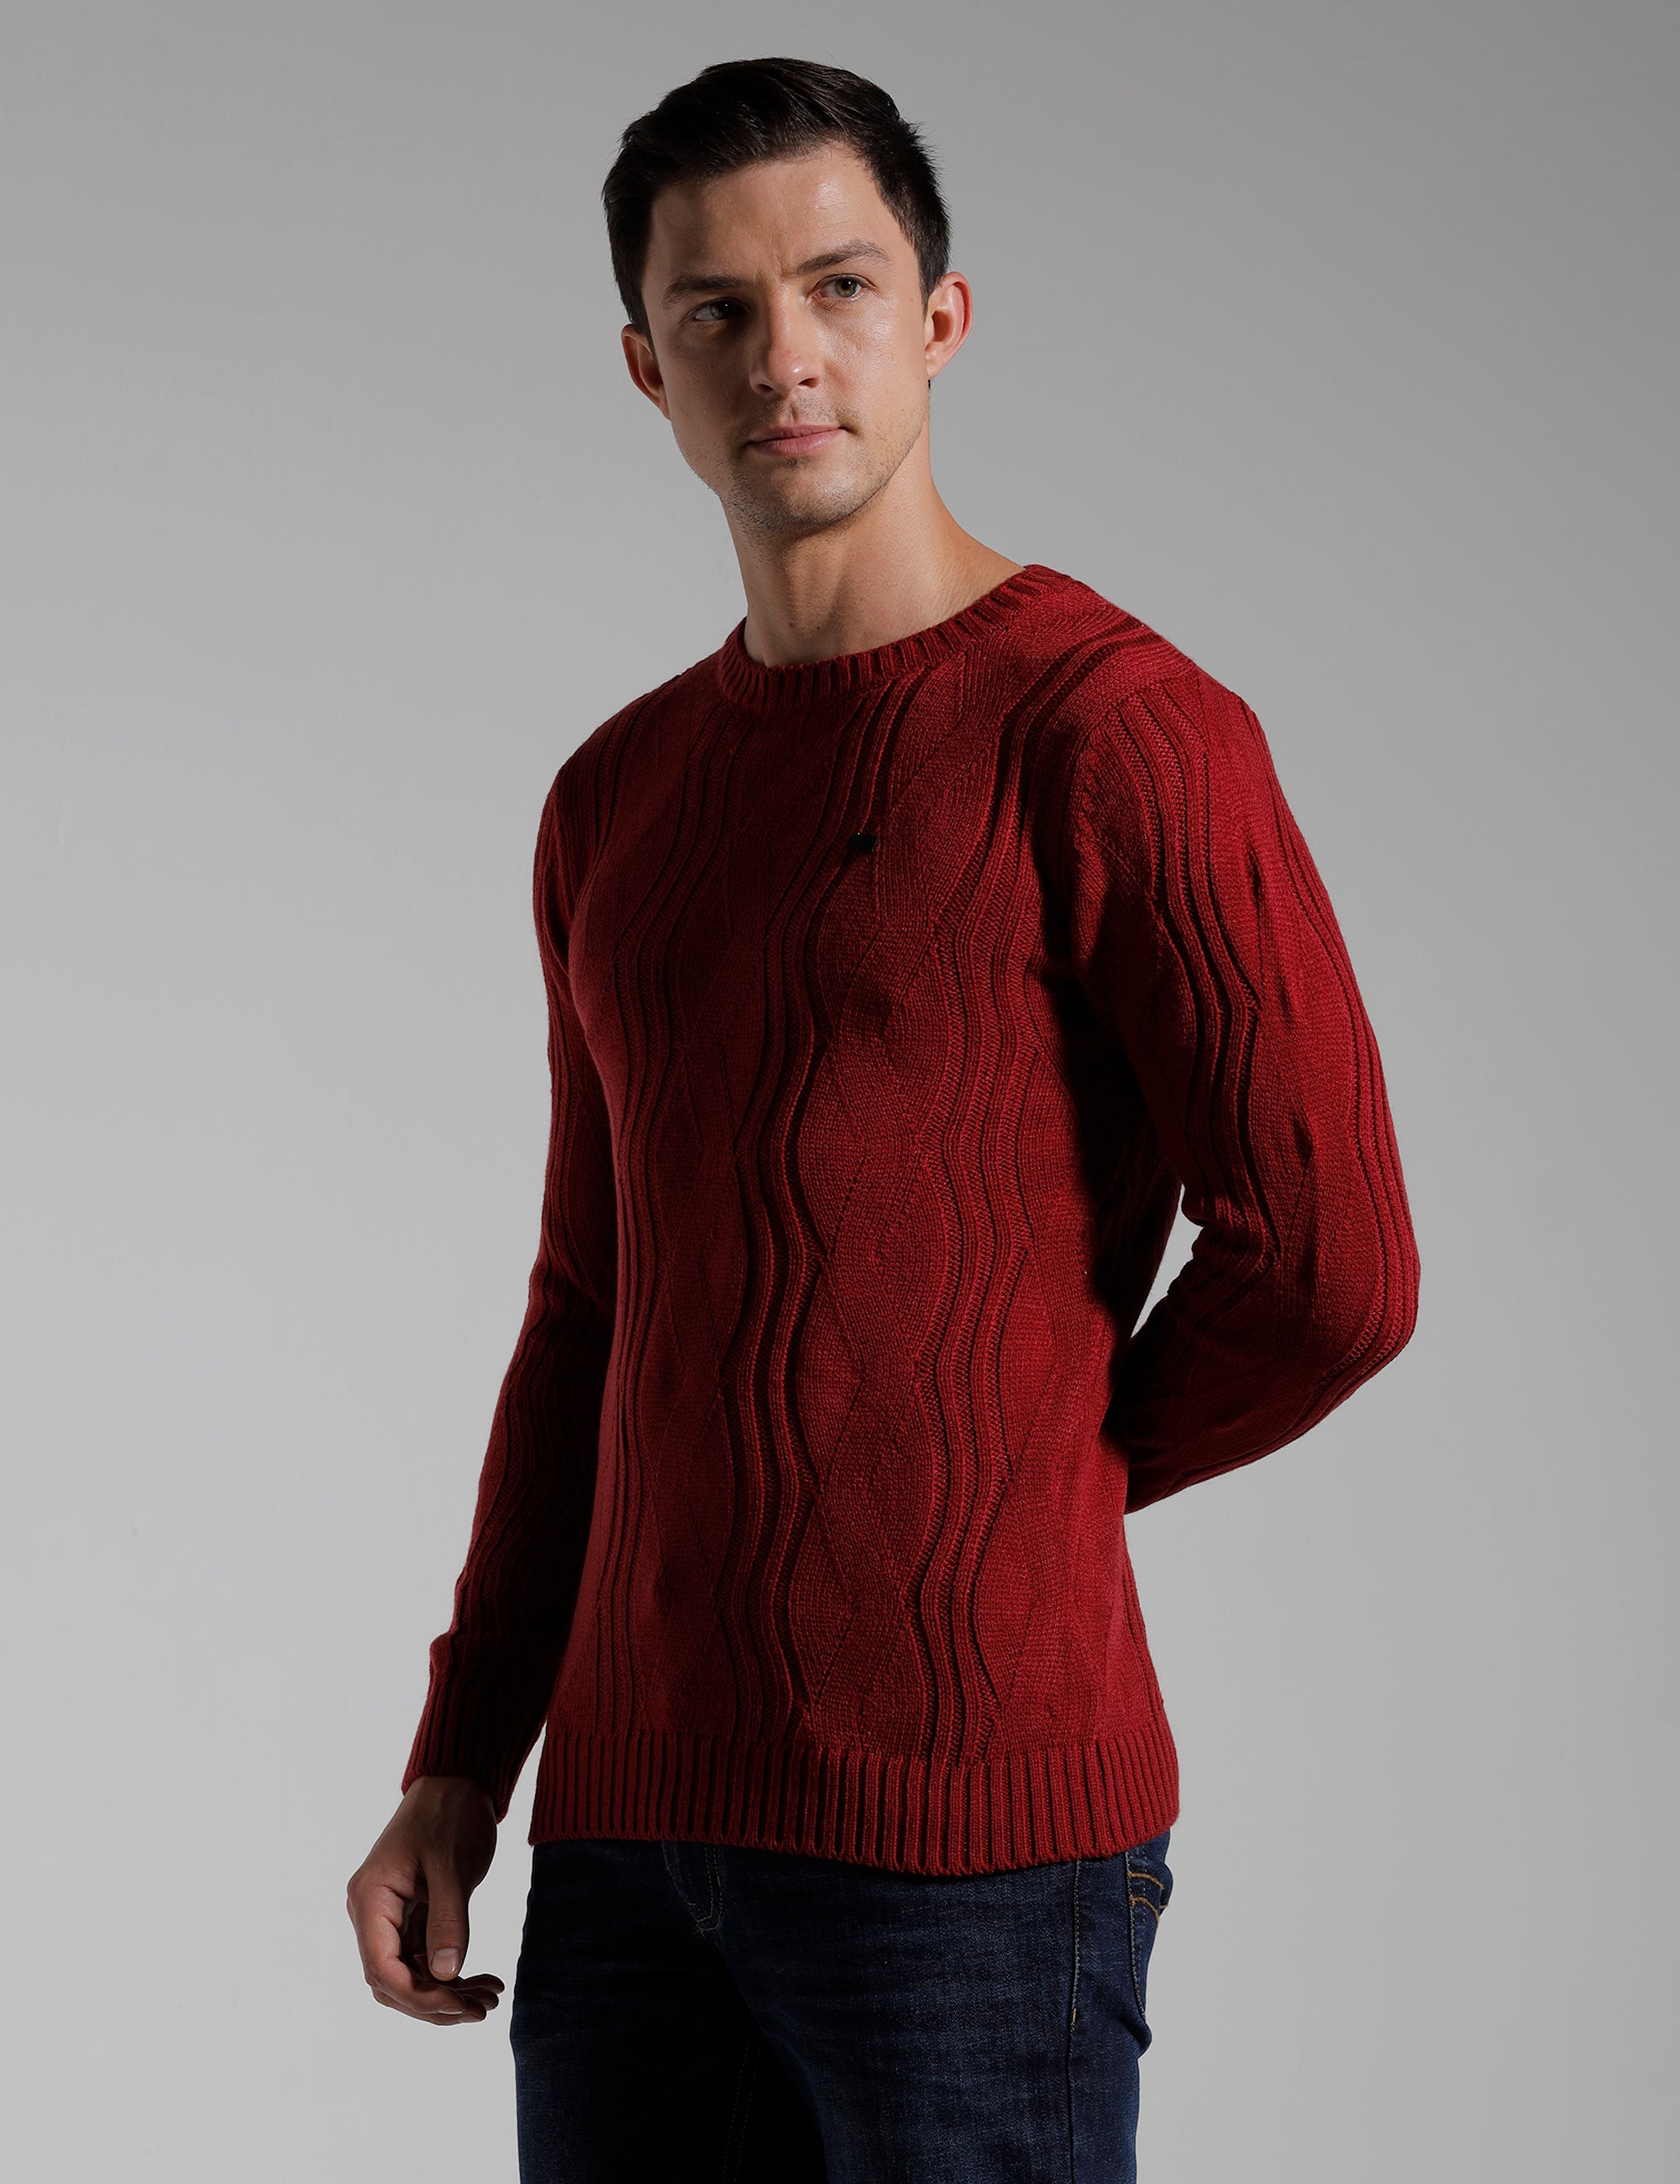 Identiti Full Sleeve Solid Slim Fit Cotton Casual Sweater Pull Over